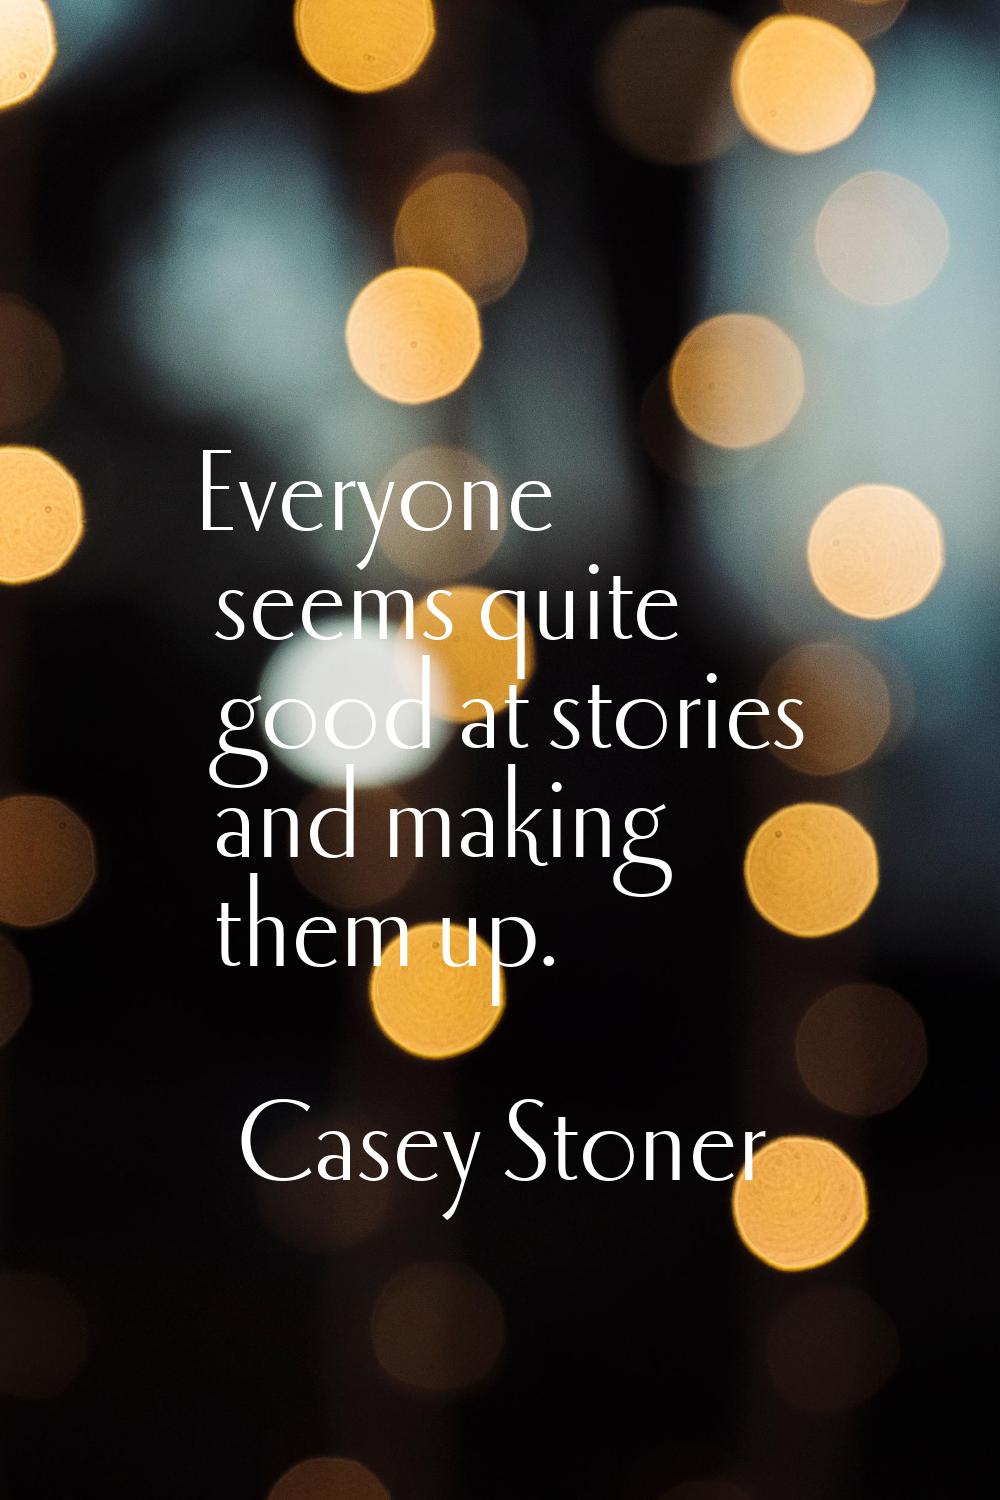 Everyone seems quite good at stories and making them up.